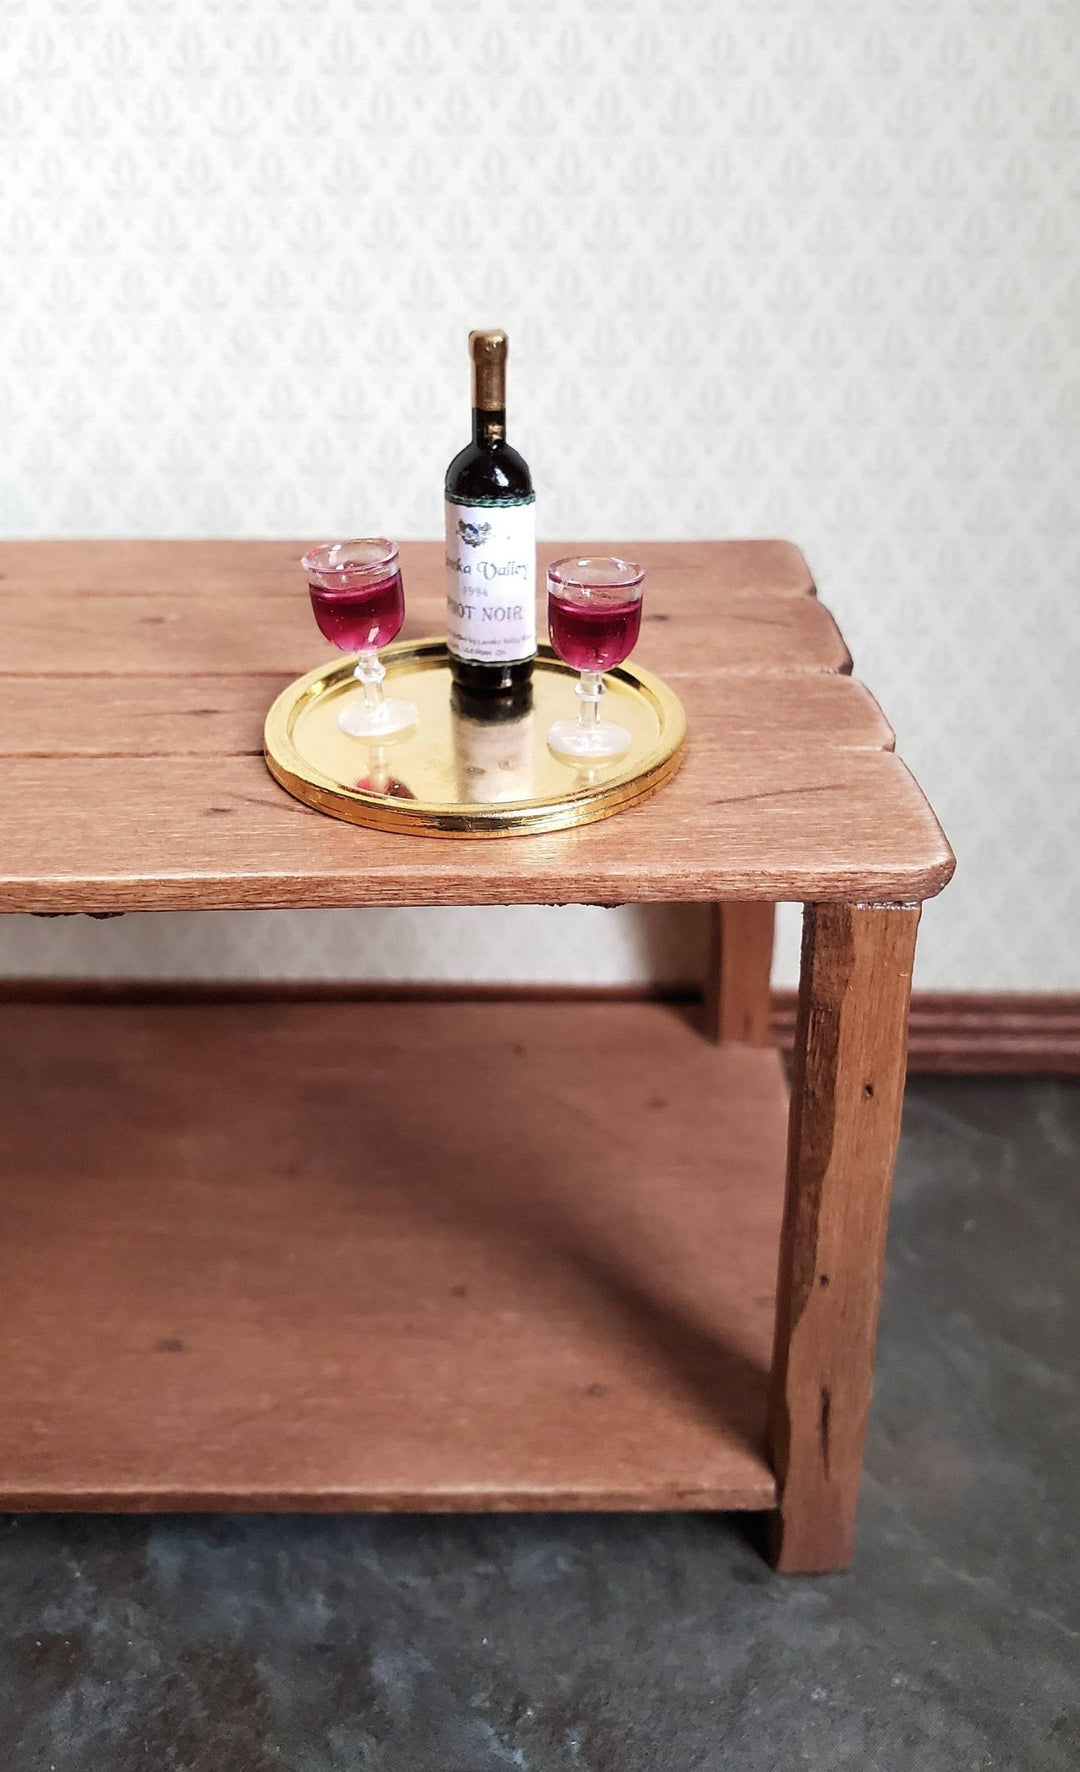 Dollhouse Miniature Red Wine Bottle & 2 Filled Wine Glasses on Tray 1:12 Scale - Miniature Crush